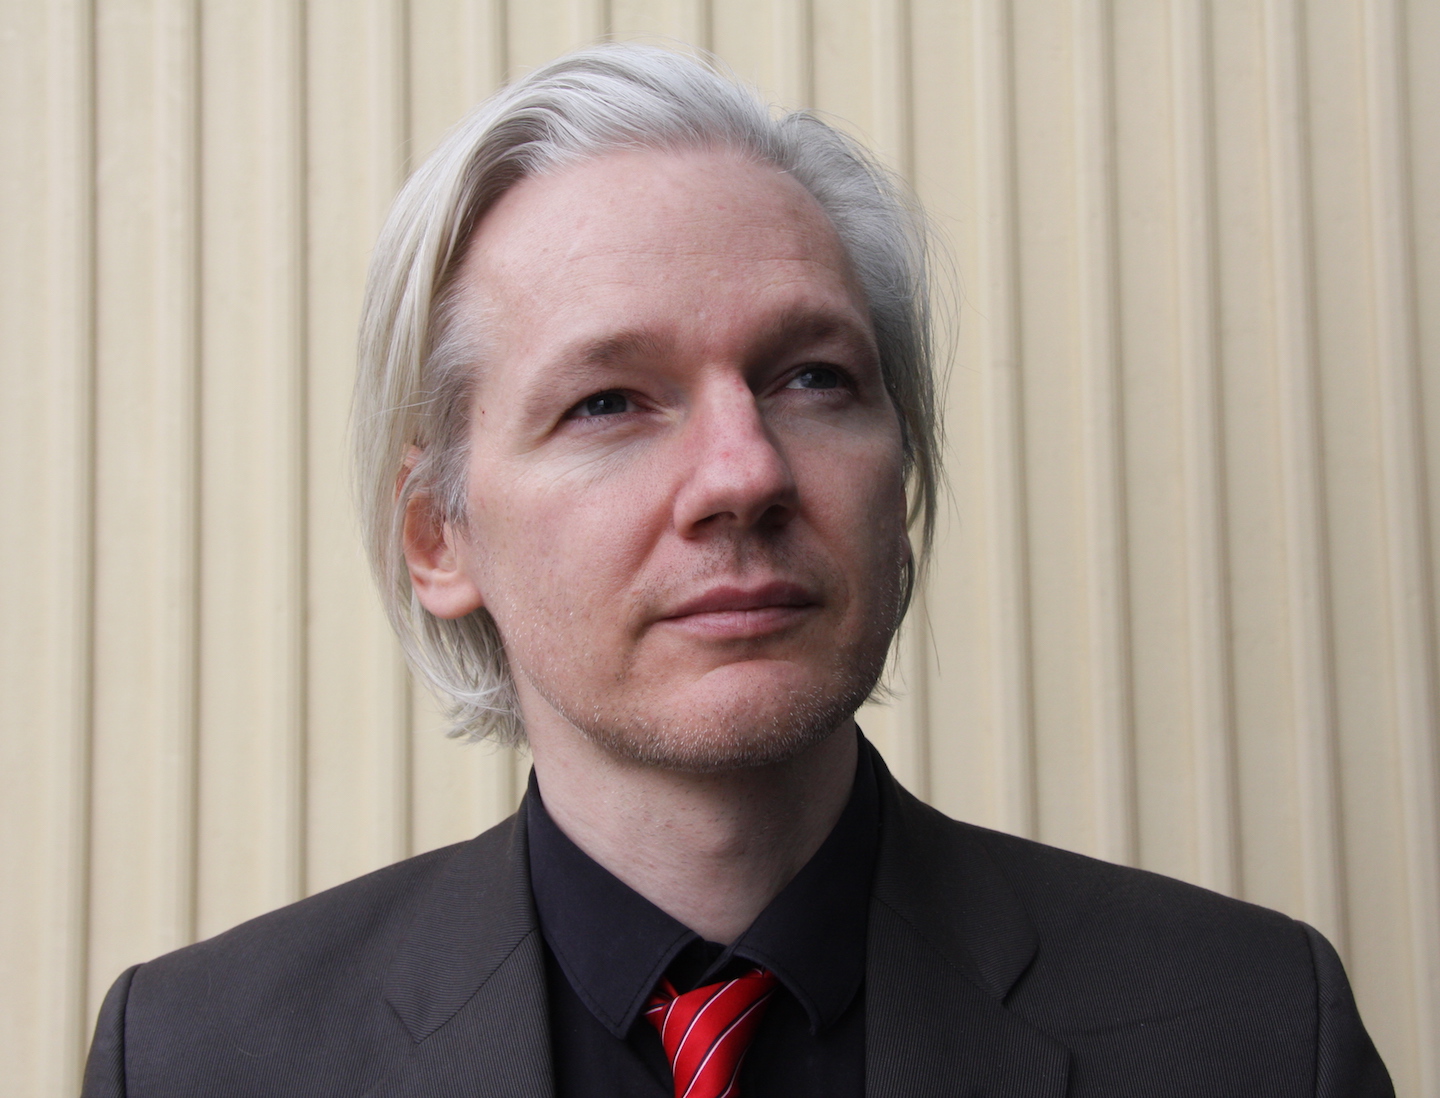 Leftist conspiracy theory collapses as Julian Assange confirms Russia not involved in Wikileaks dumps